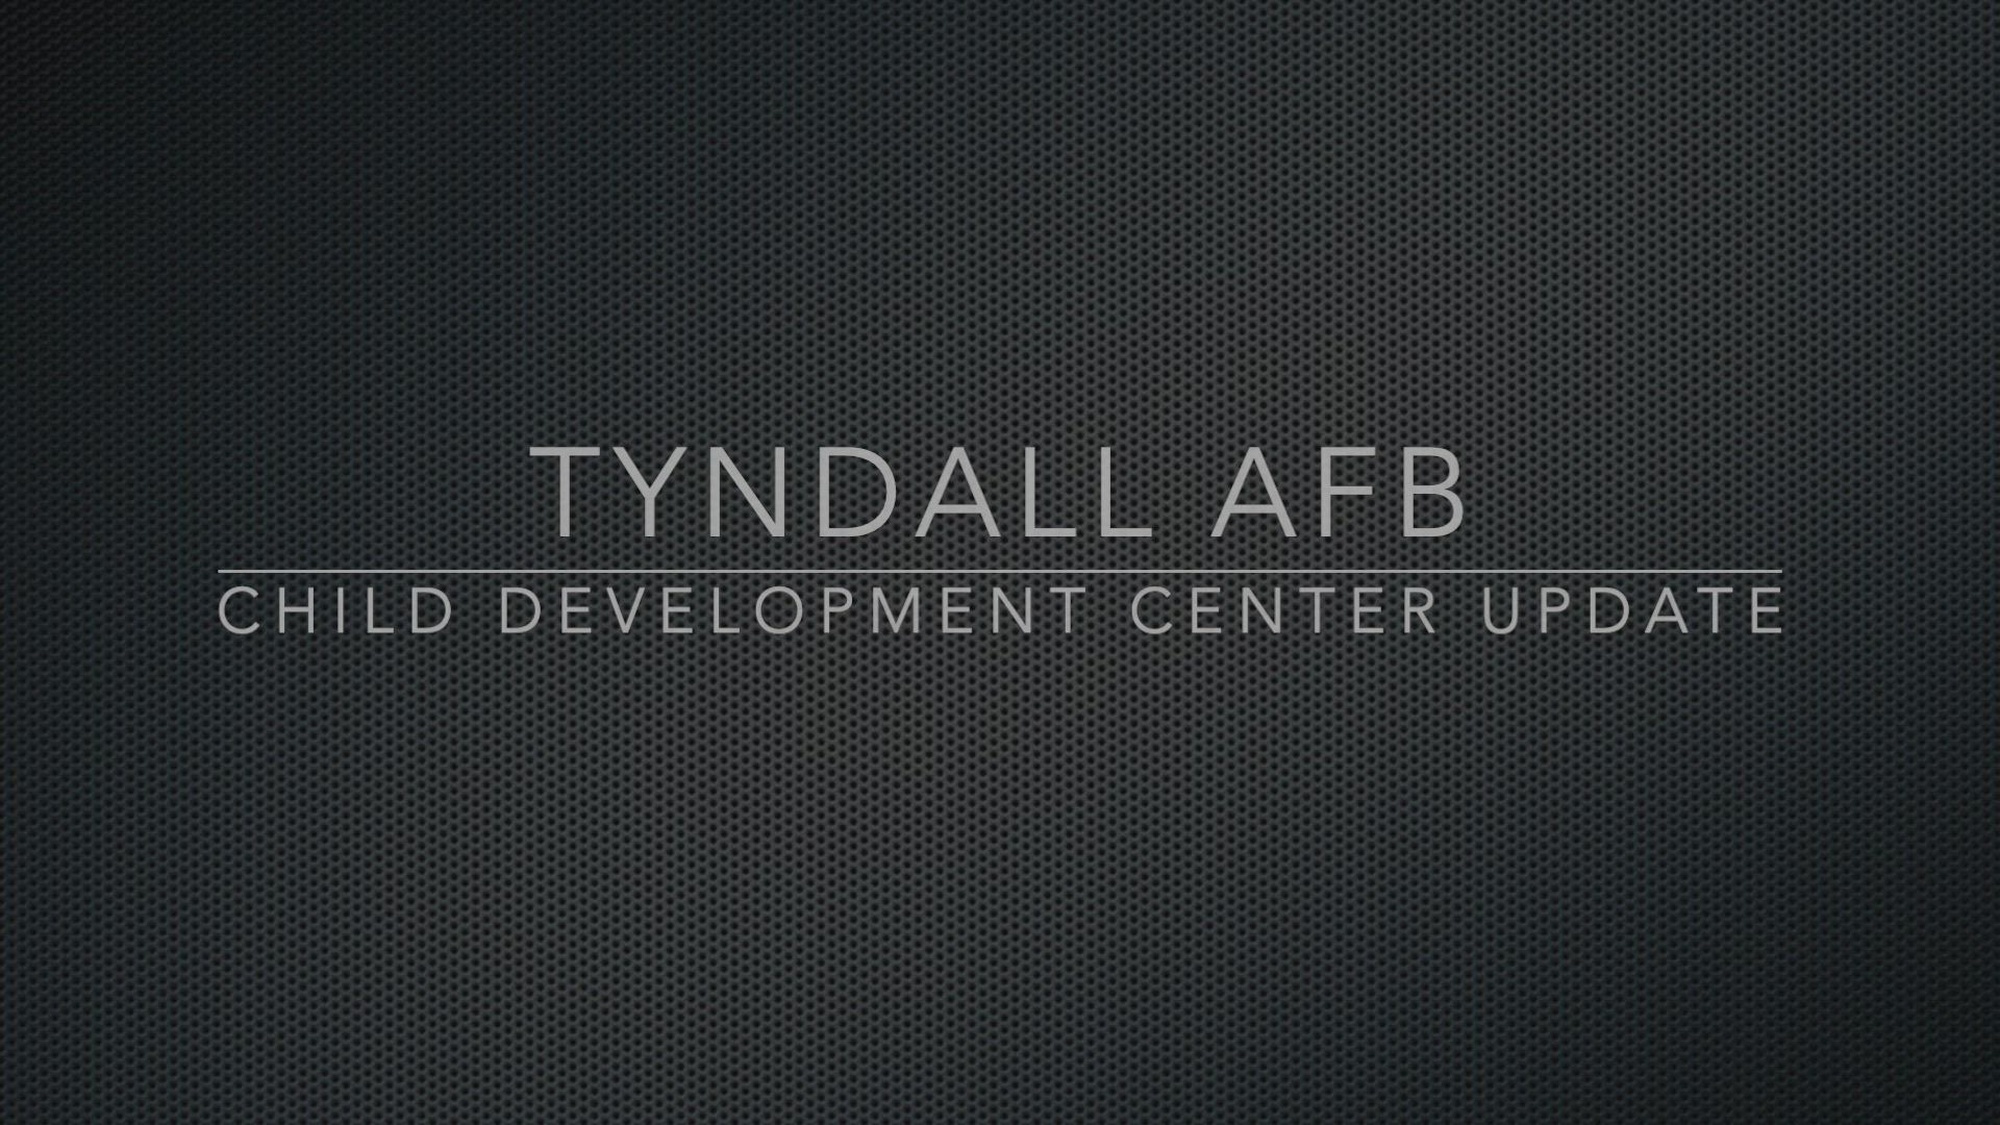 New CDC near completion at Tyndall AFB, Fla.